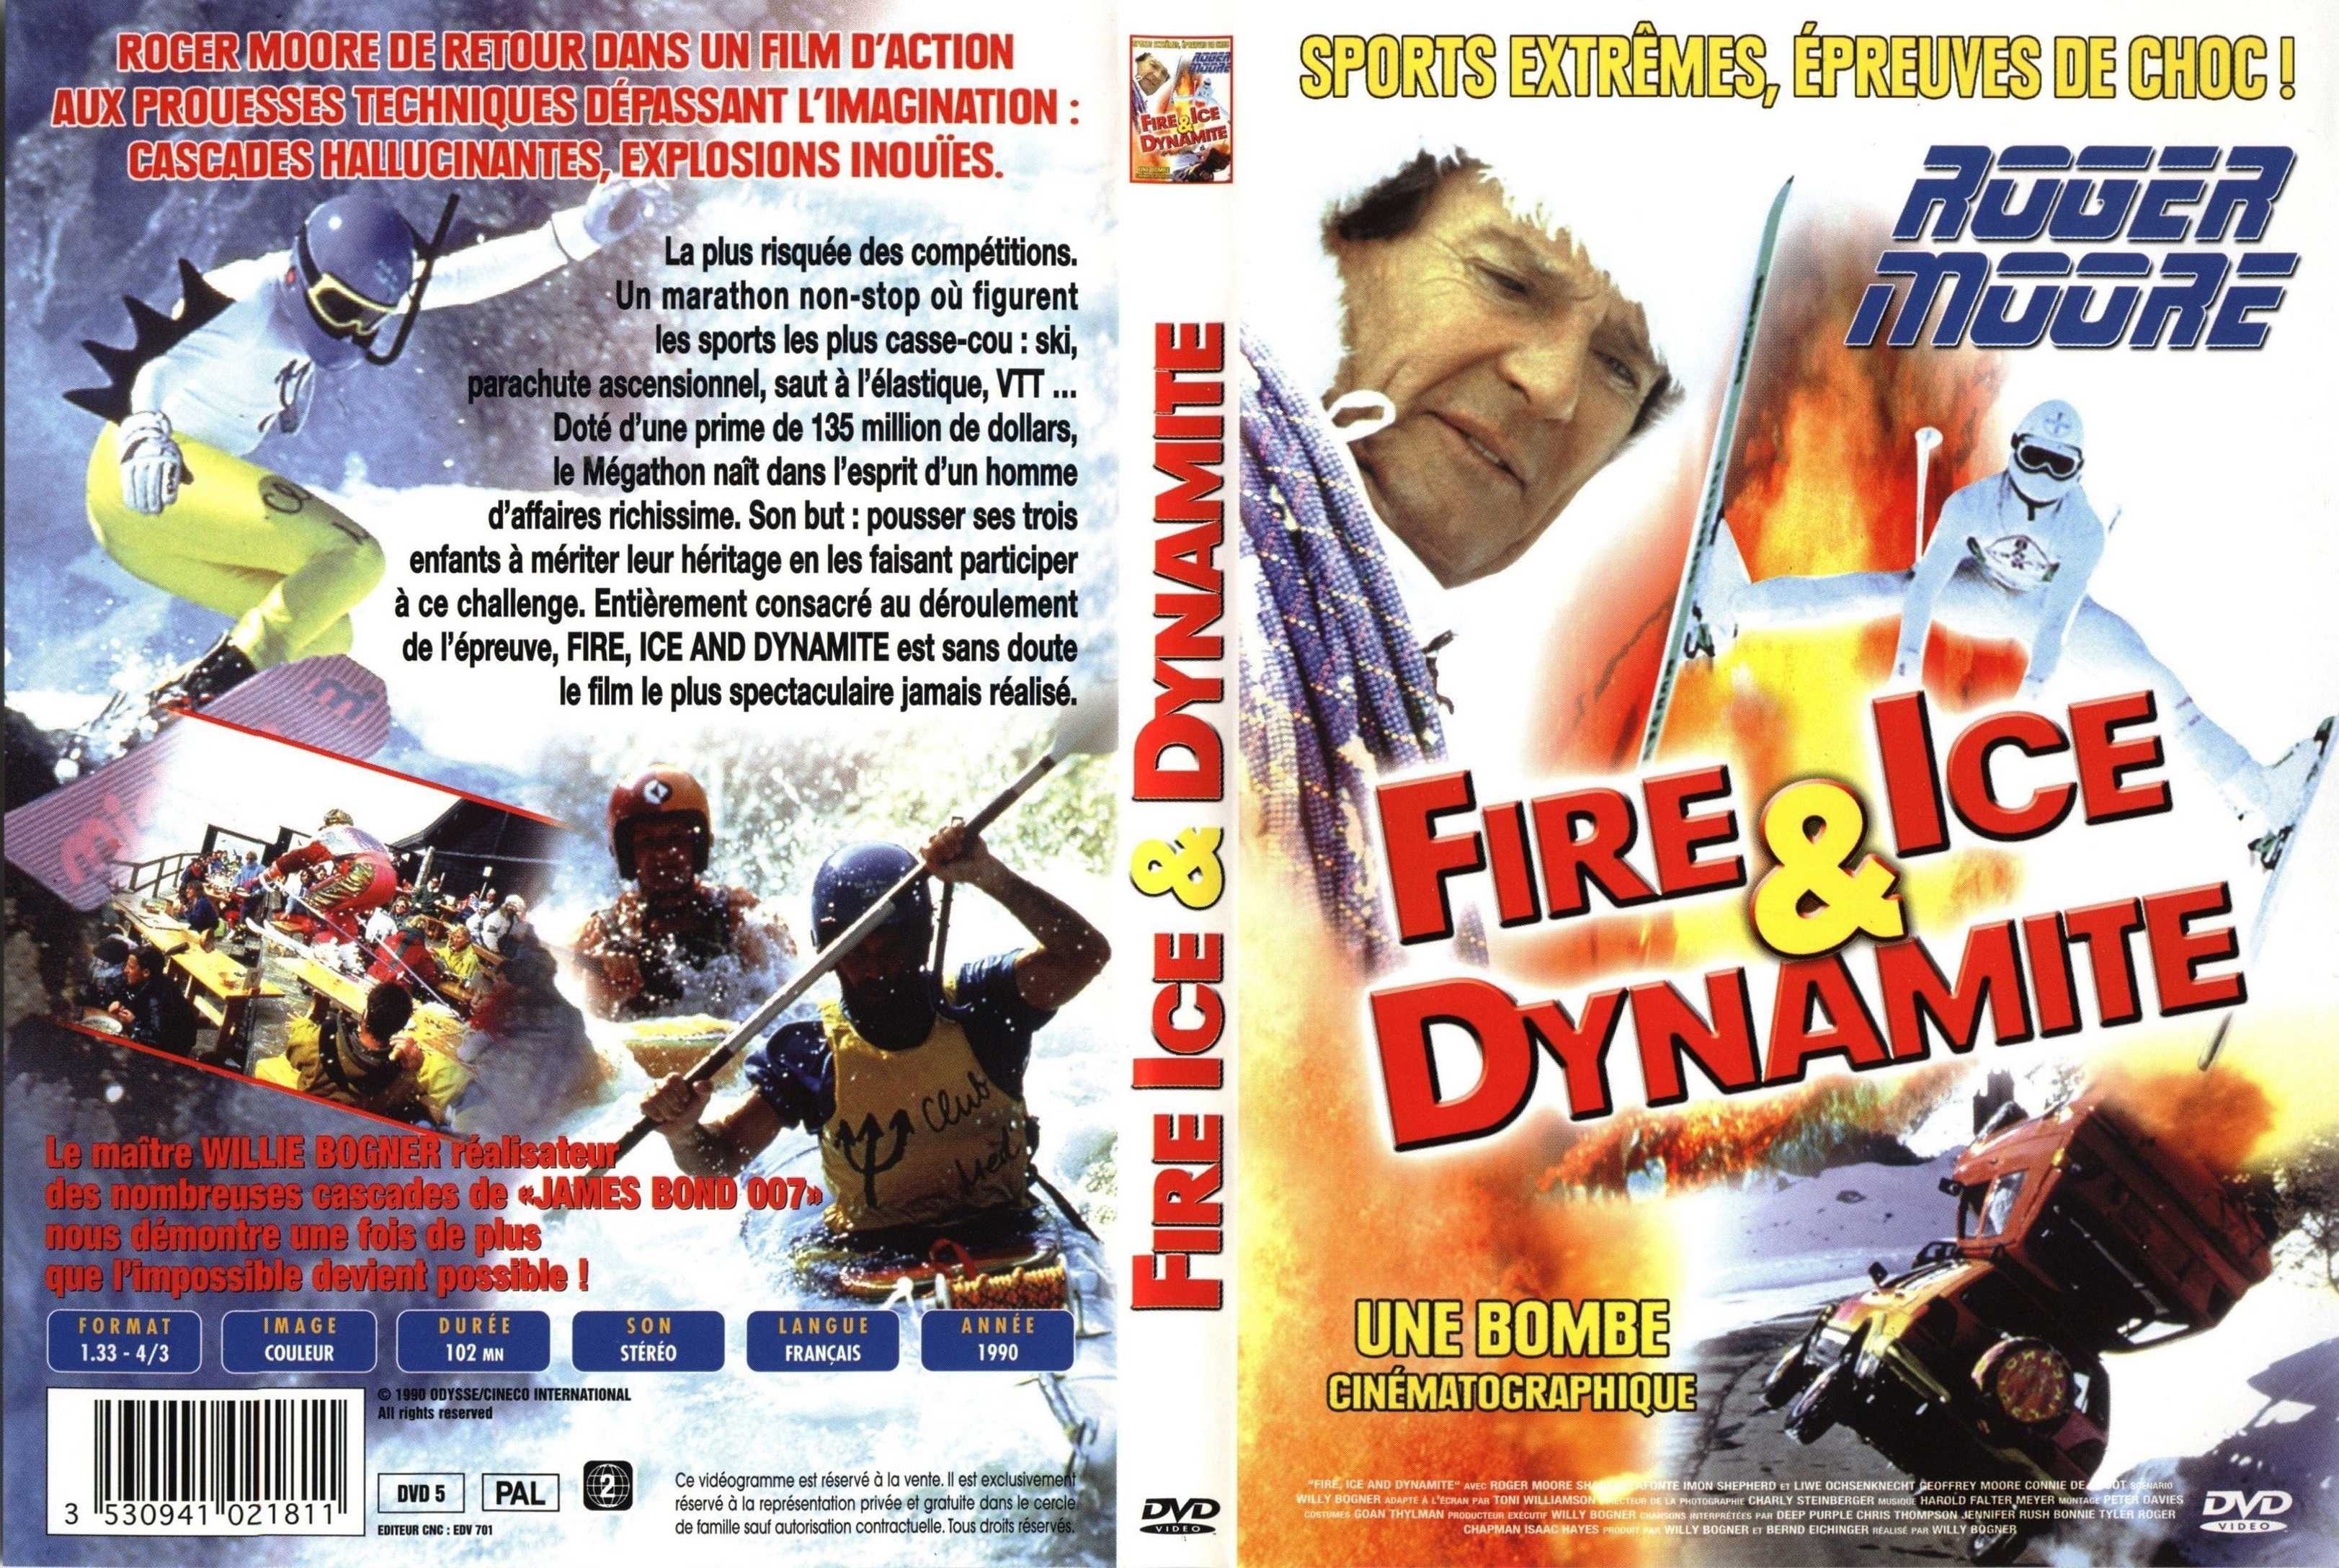 Jaquette DVD Fire Ice and Dynamite v2